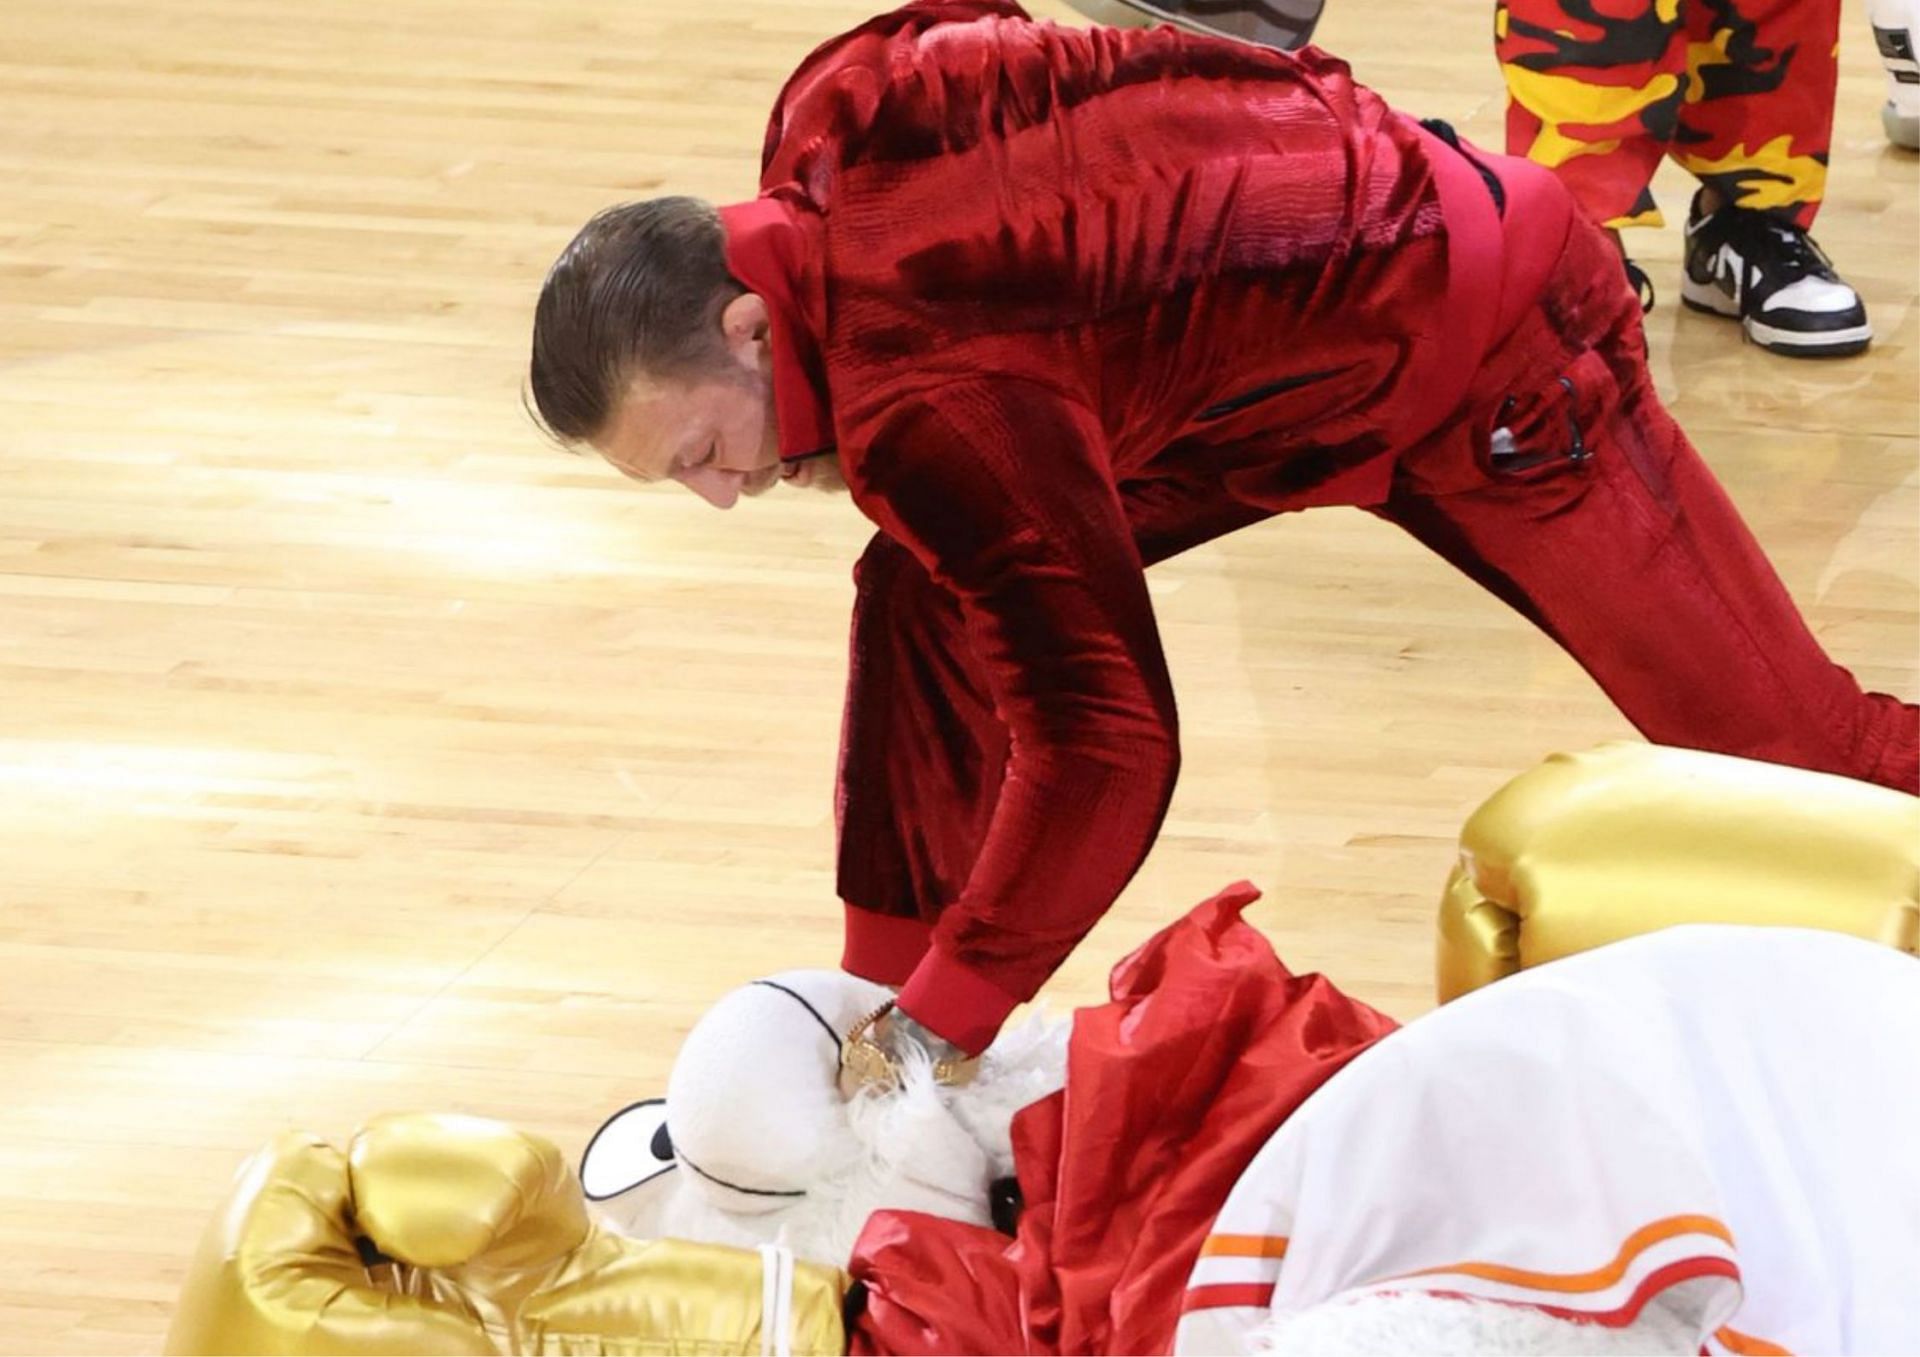 Conor McGregor knocked out Burnie, the Miami Heat mascot during the halftime show of Game 4 of the NBA Finals.